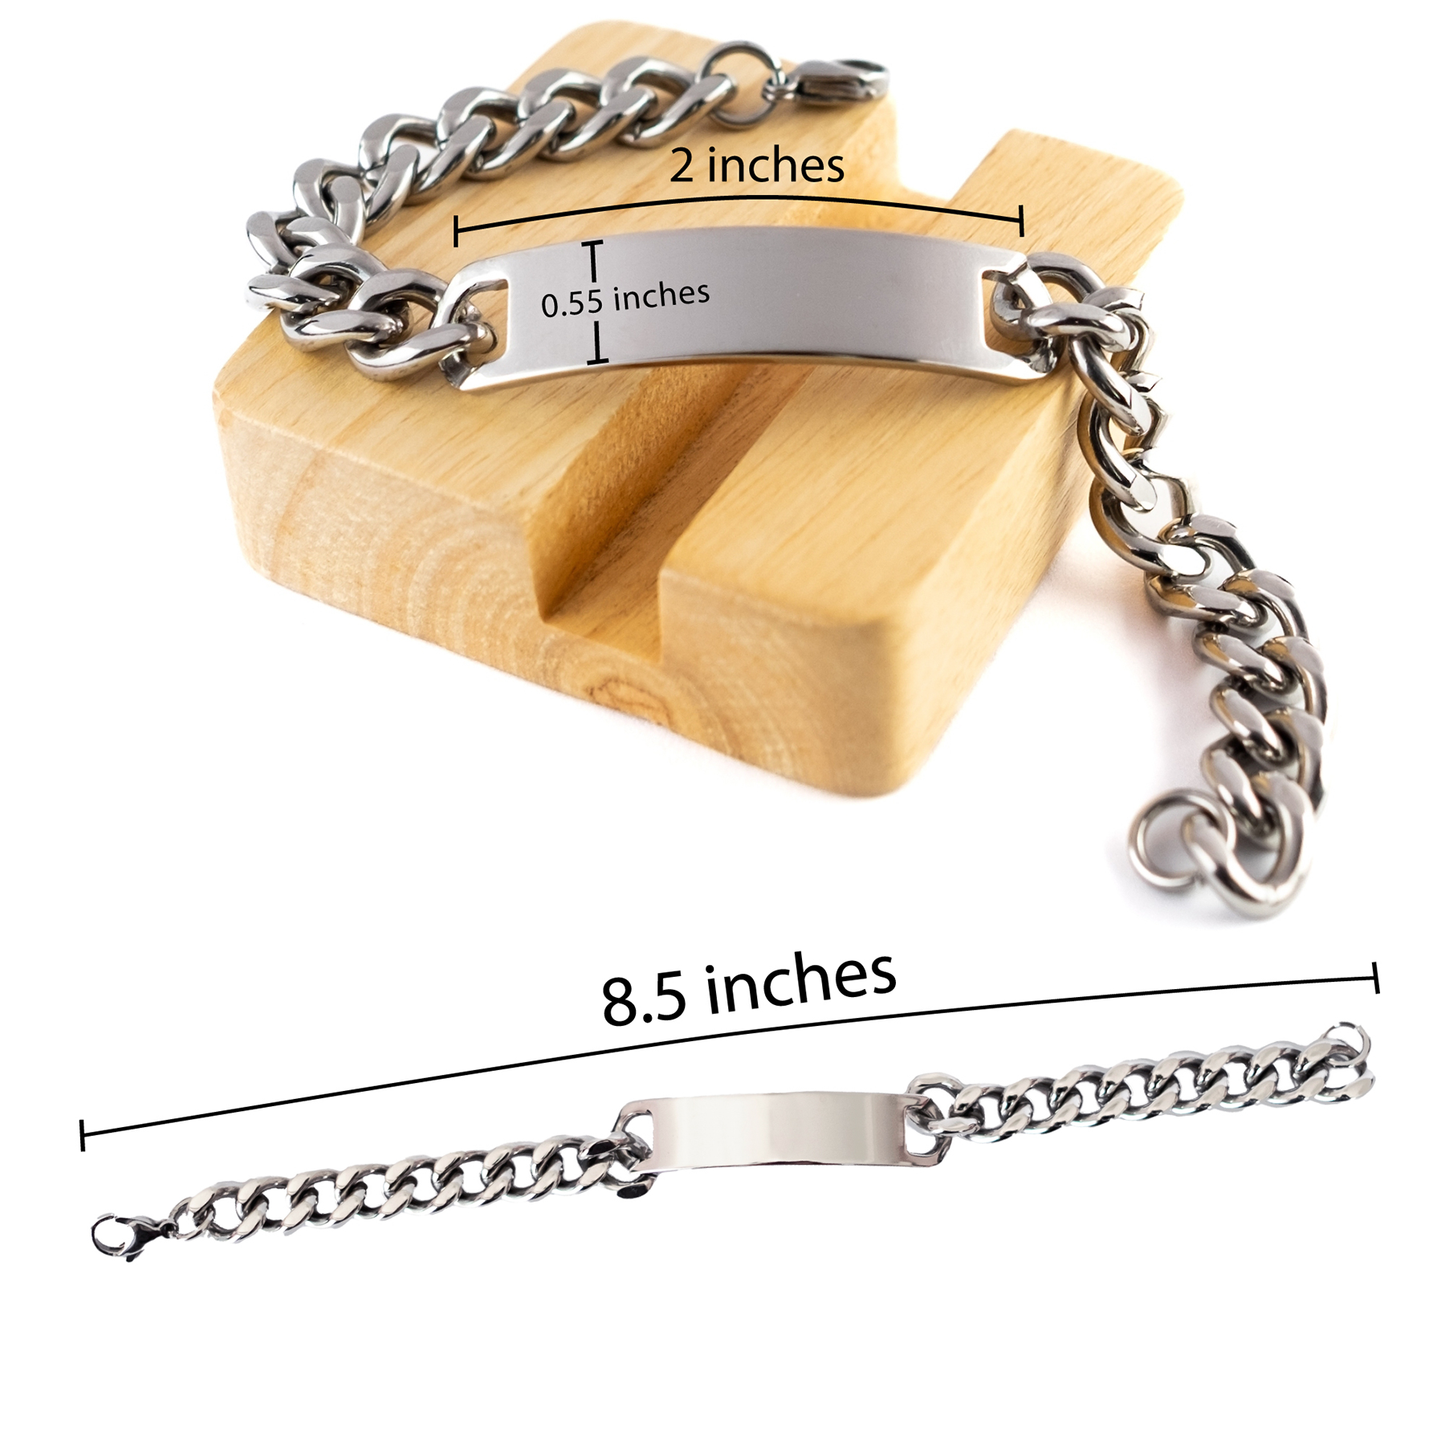 To My Grand Daddy Thank You Gifts, You are appreciated more than you know, Appreciation Cuban Chain Stainless Steel Bracelet for Grand Daddy, Birthday Unique Gifts for Grand Daddy